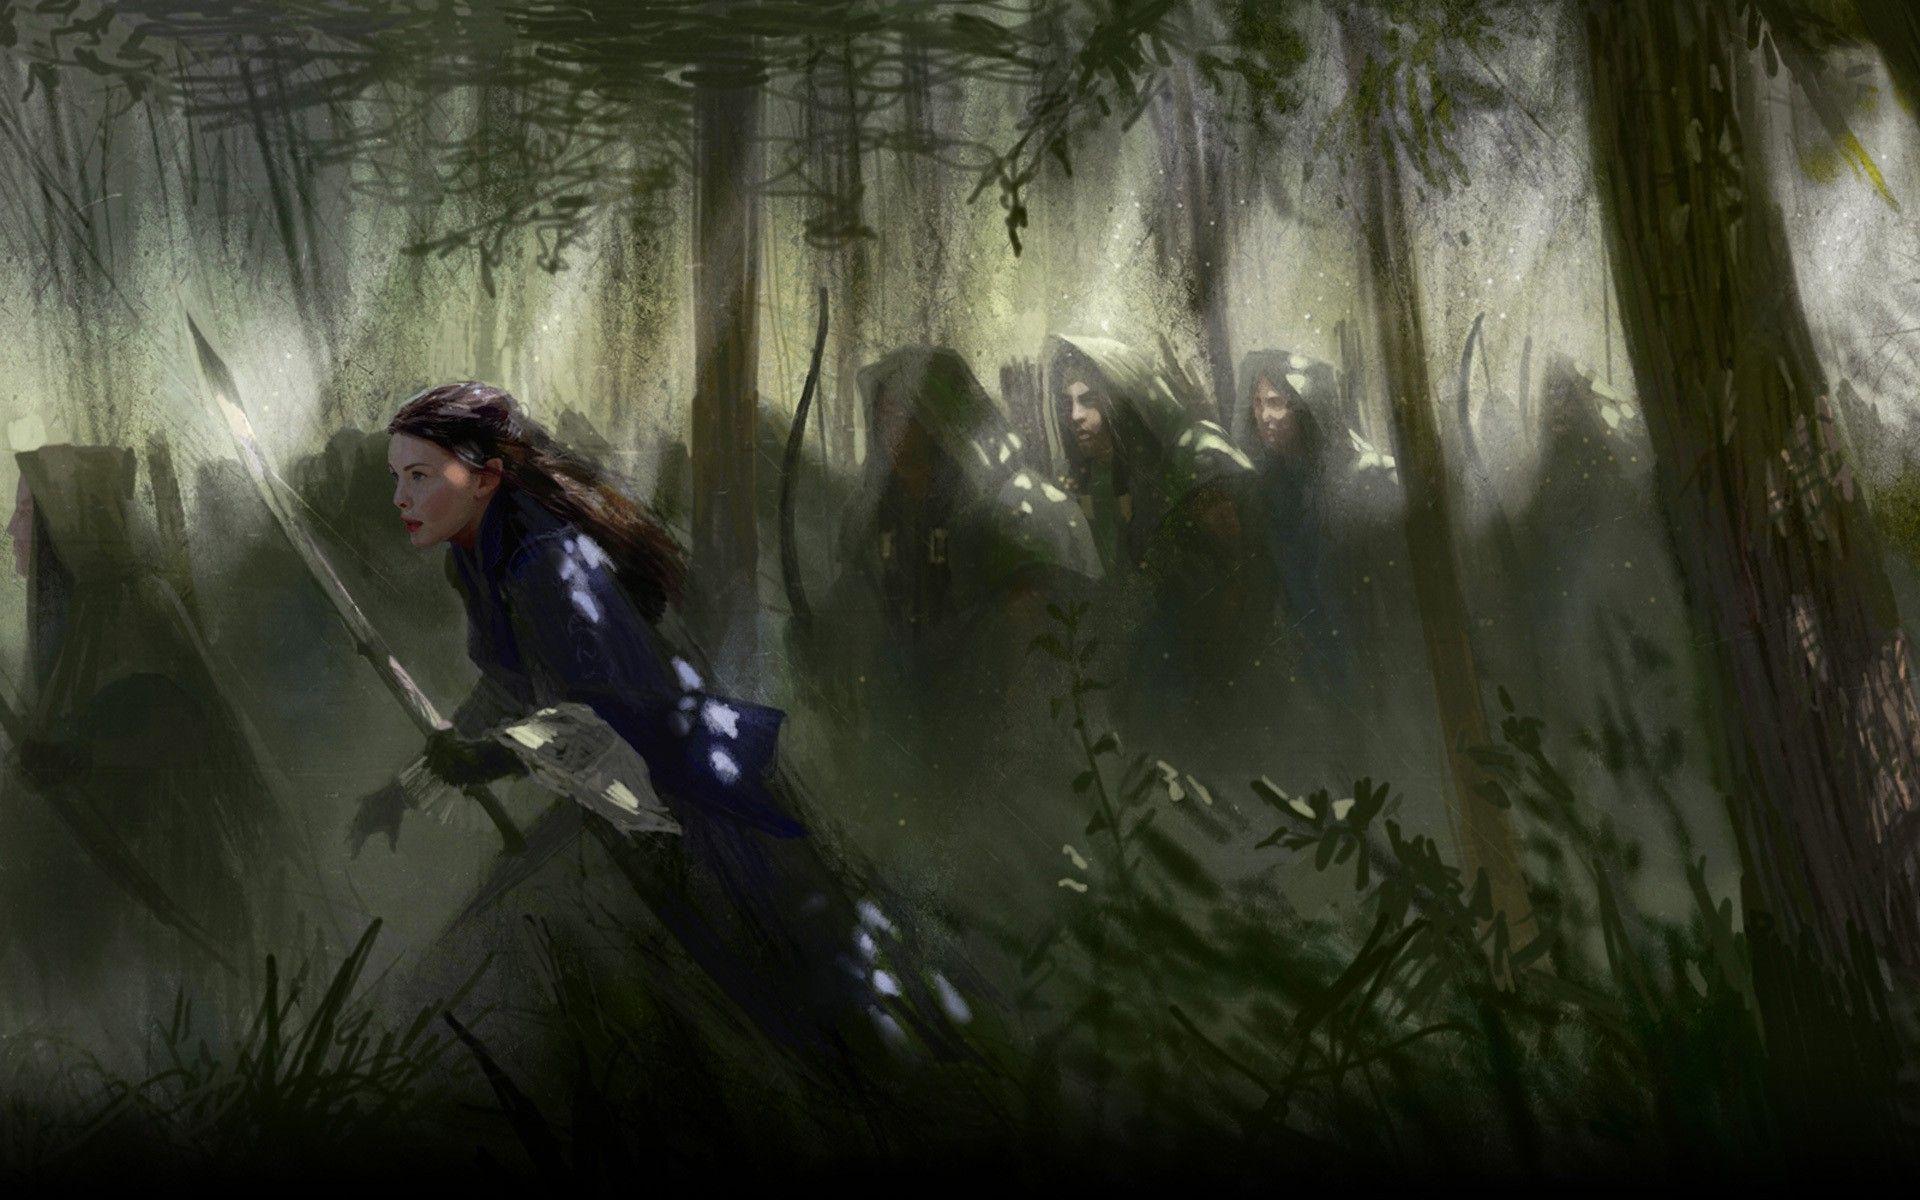 Arwen Lord of The Rings wallpaper. movies and tv series